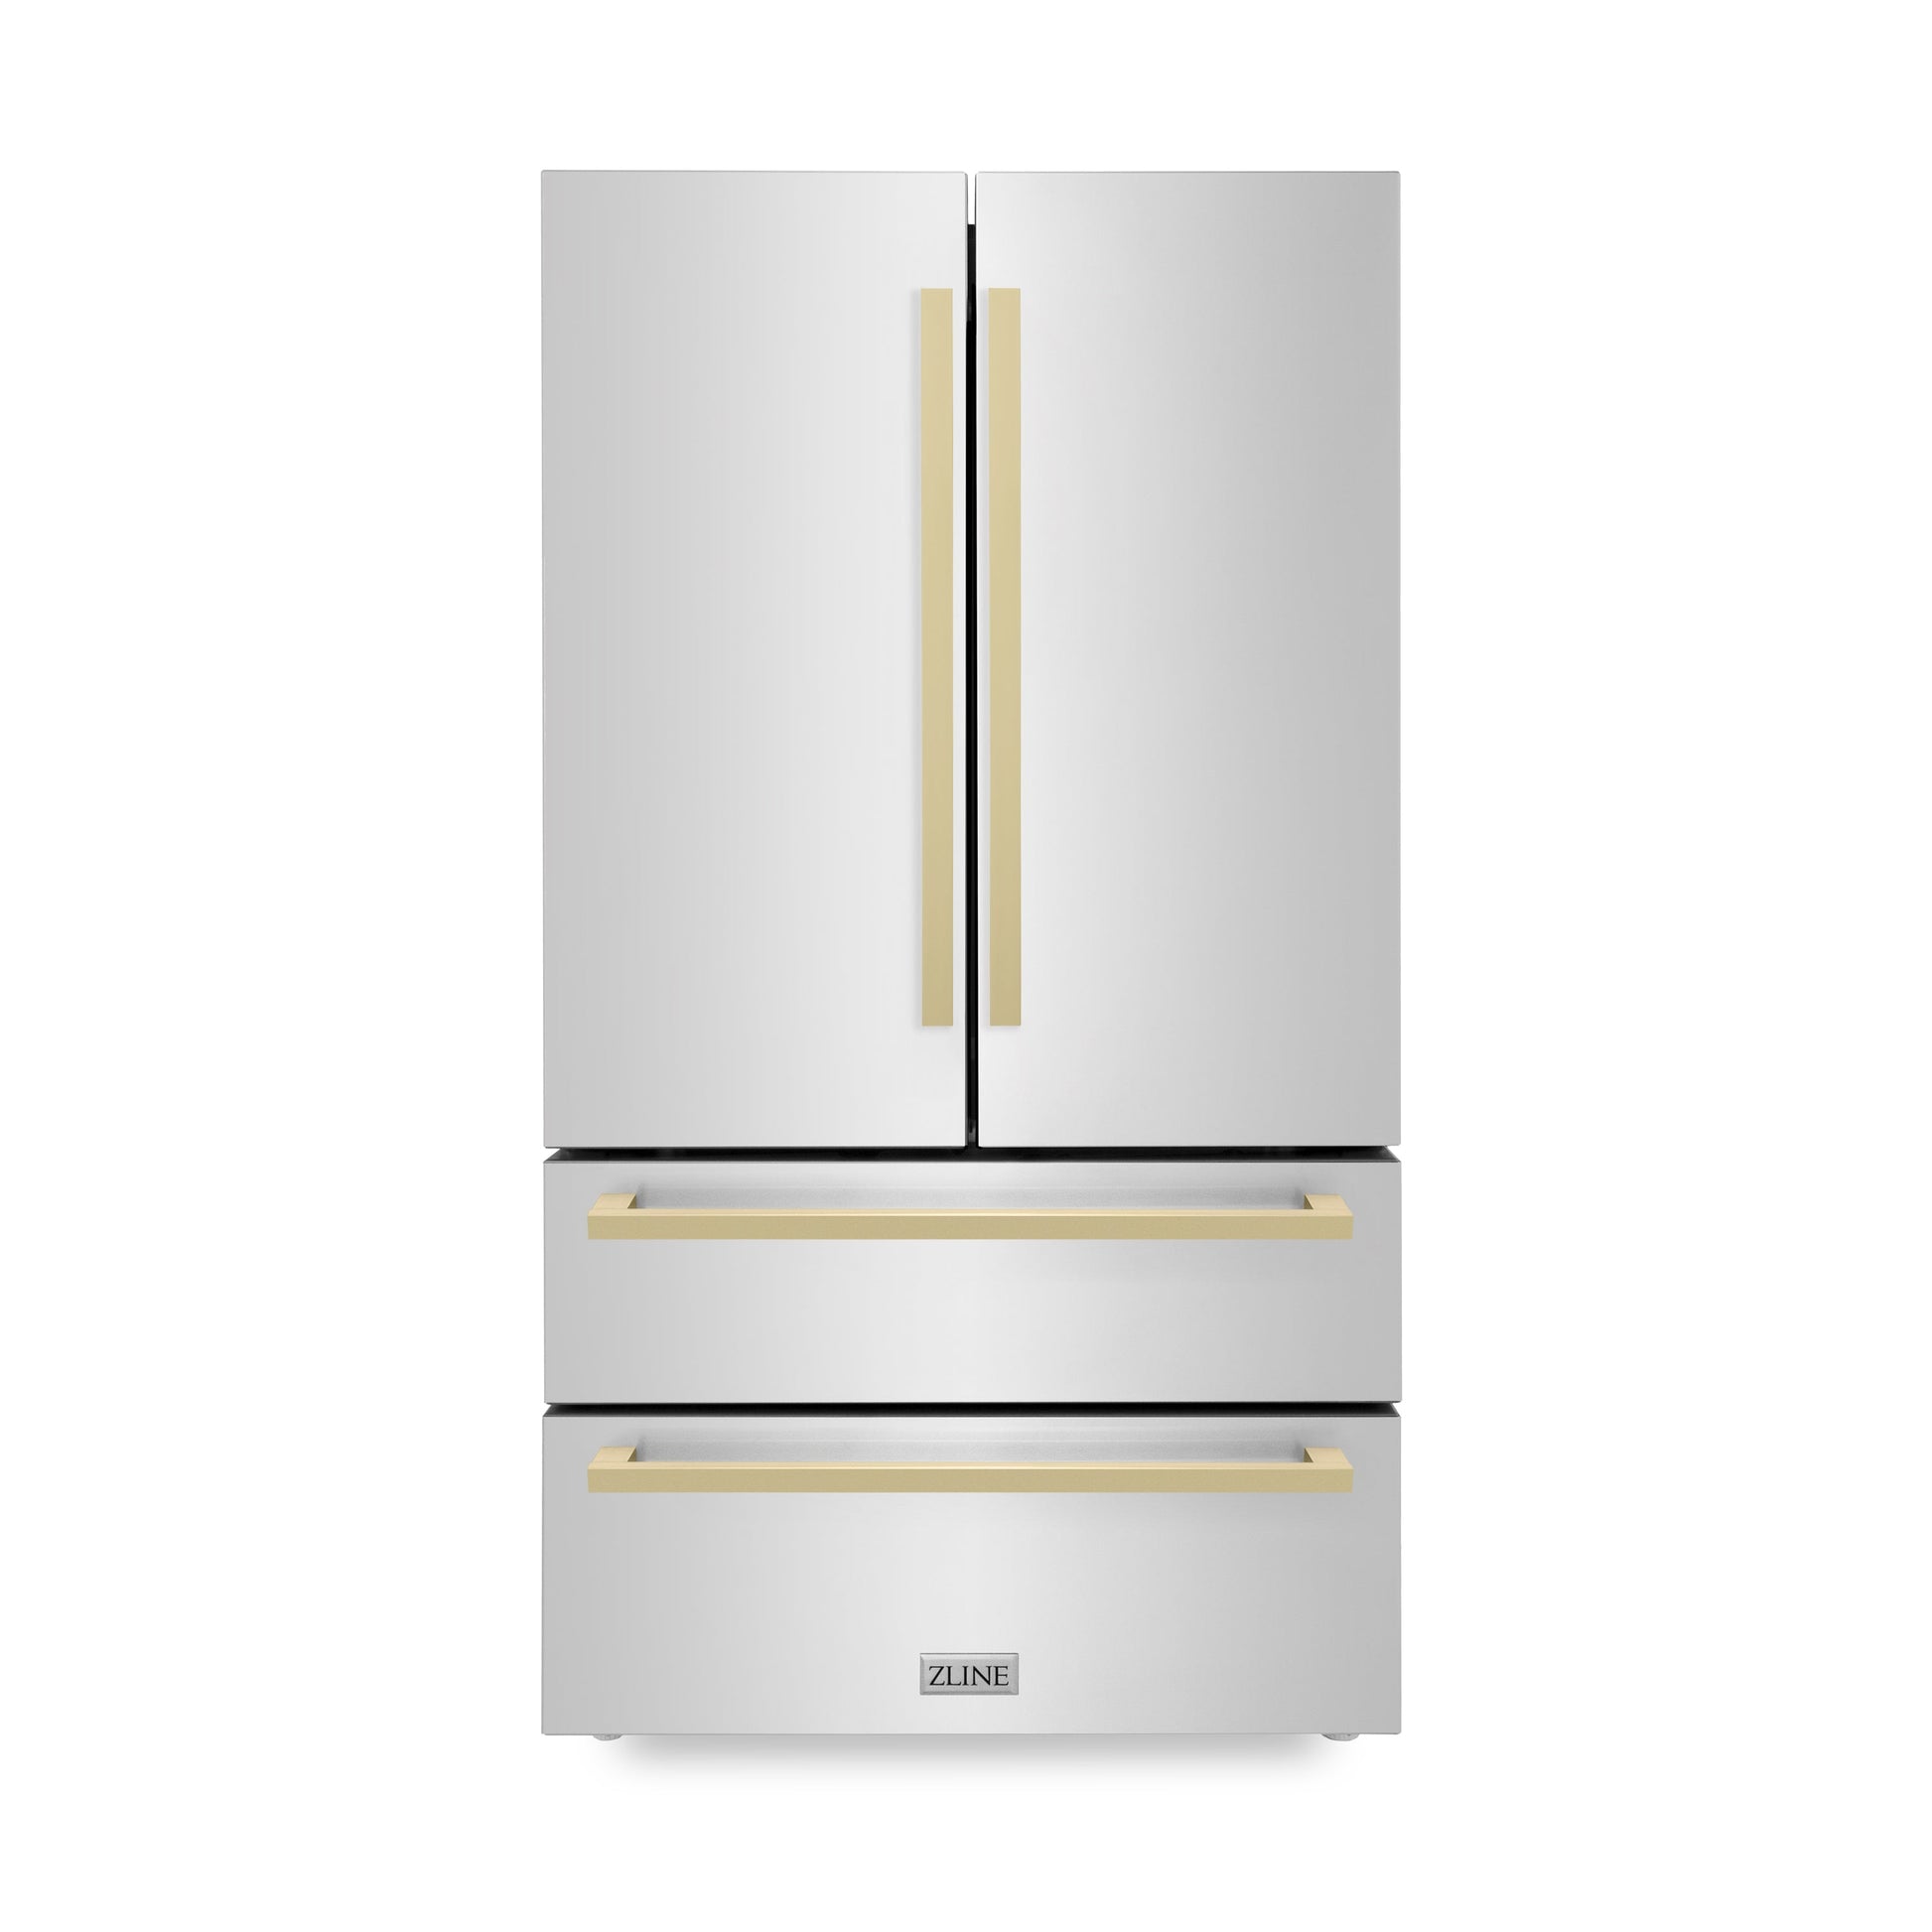 ZLINE 36" Autograph Edition 4-Door French Door Refrigerator with Ice Maker - Stainless Steel with Champagne Bronze Square Handles